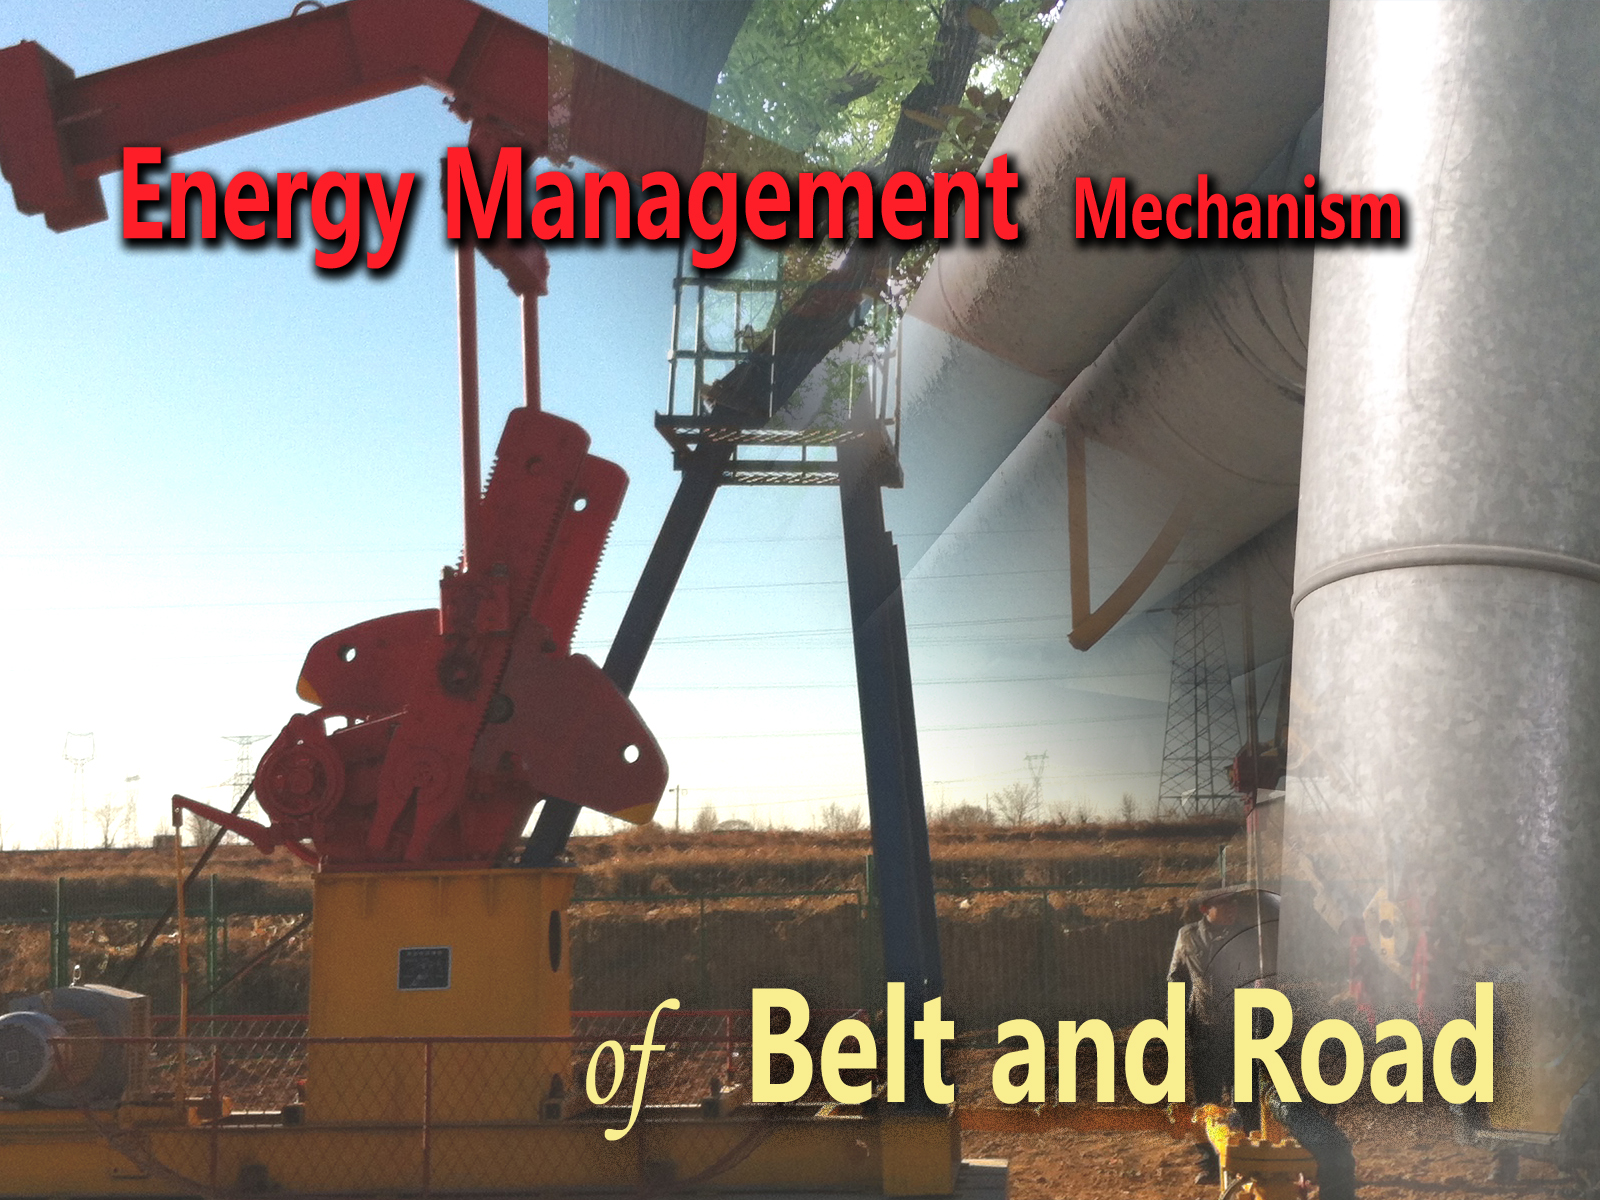 Energy Management Mechanism Relating to B&R